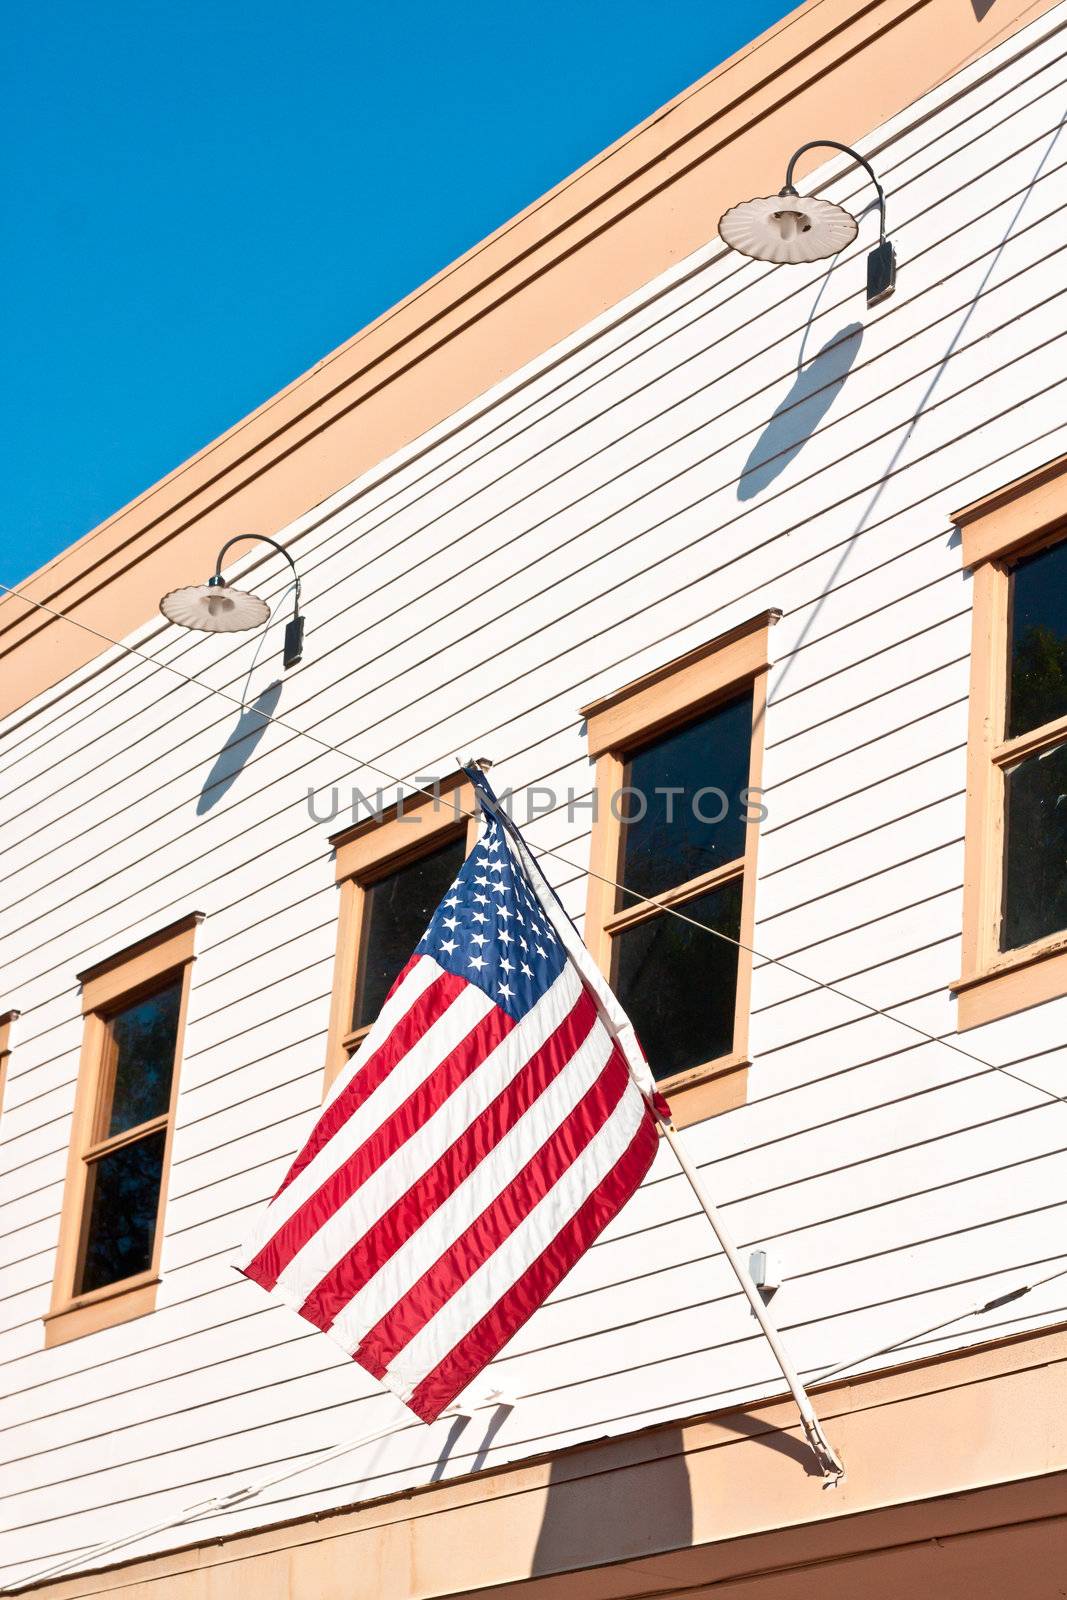 American flag attached to a small town building in the USA